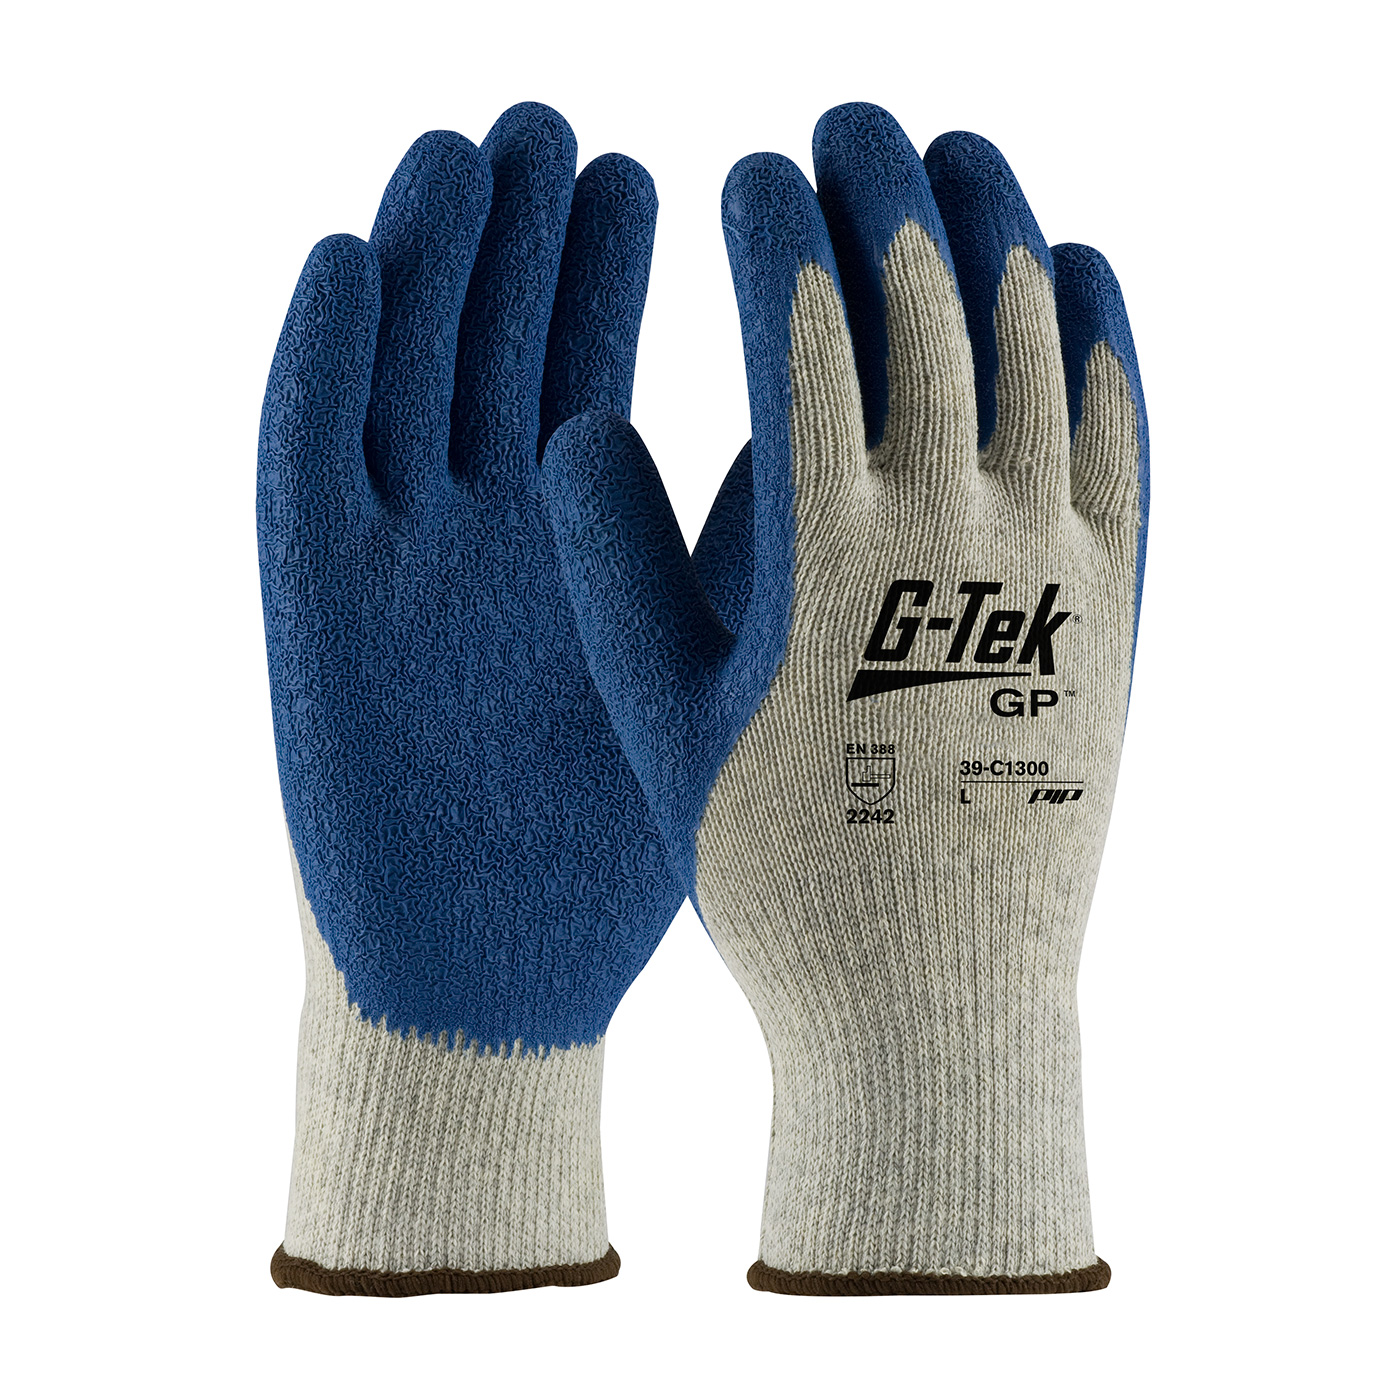 PIP 39-C1300/XL G-Tek GP Seamless Knit Cotton/Polyester Glove with Latex Coated Crinkle Grip on Palm & Fingers - Premium Grade - X-Large PID-39 C1300 XL